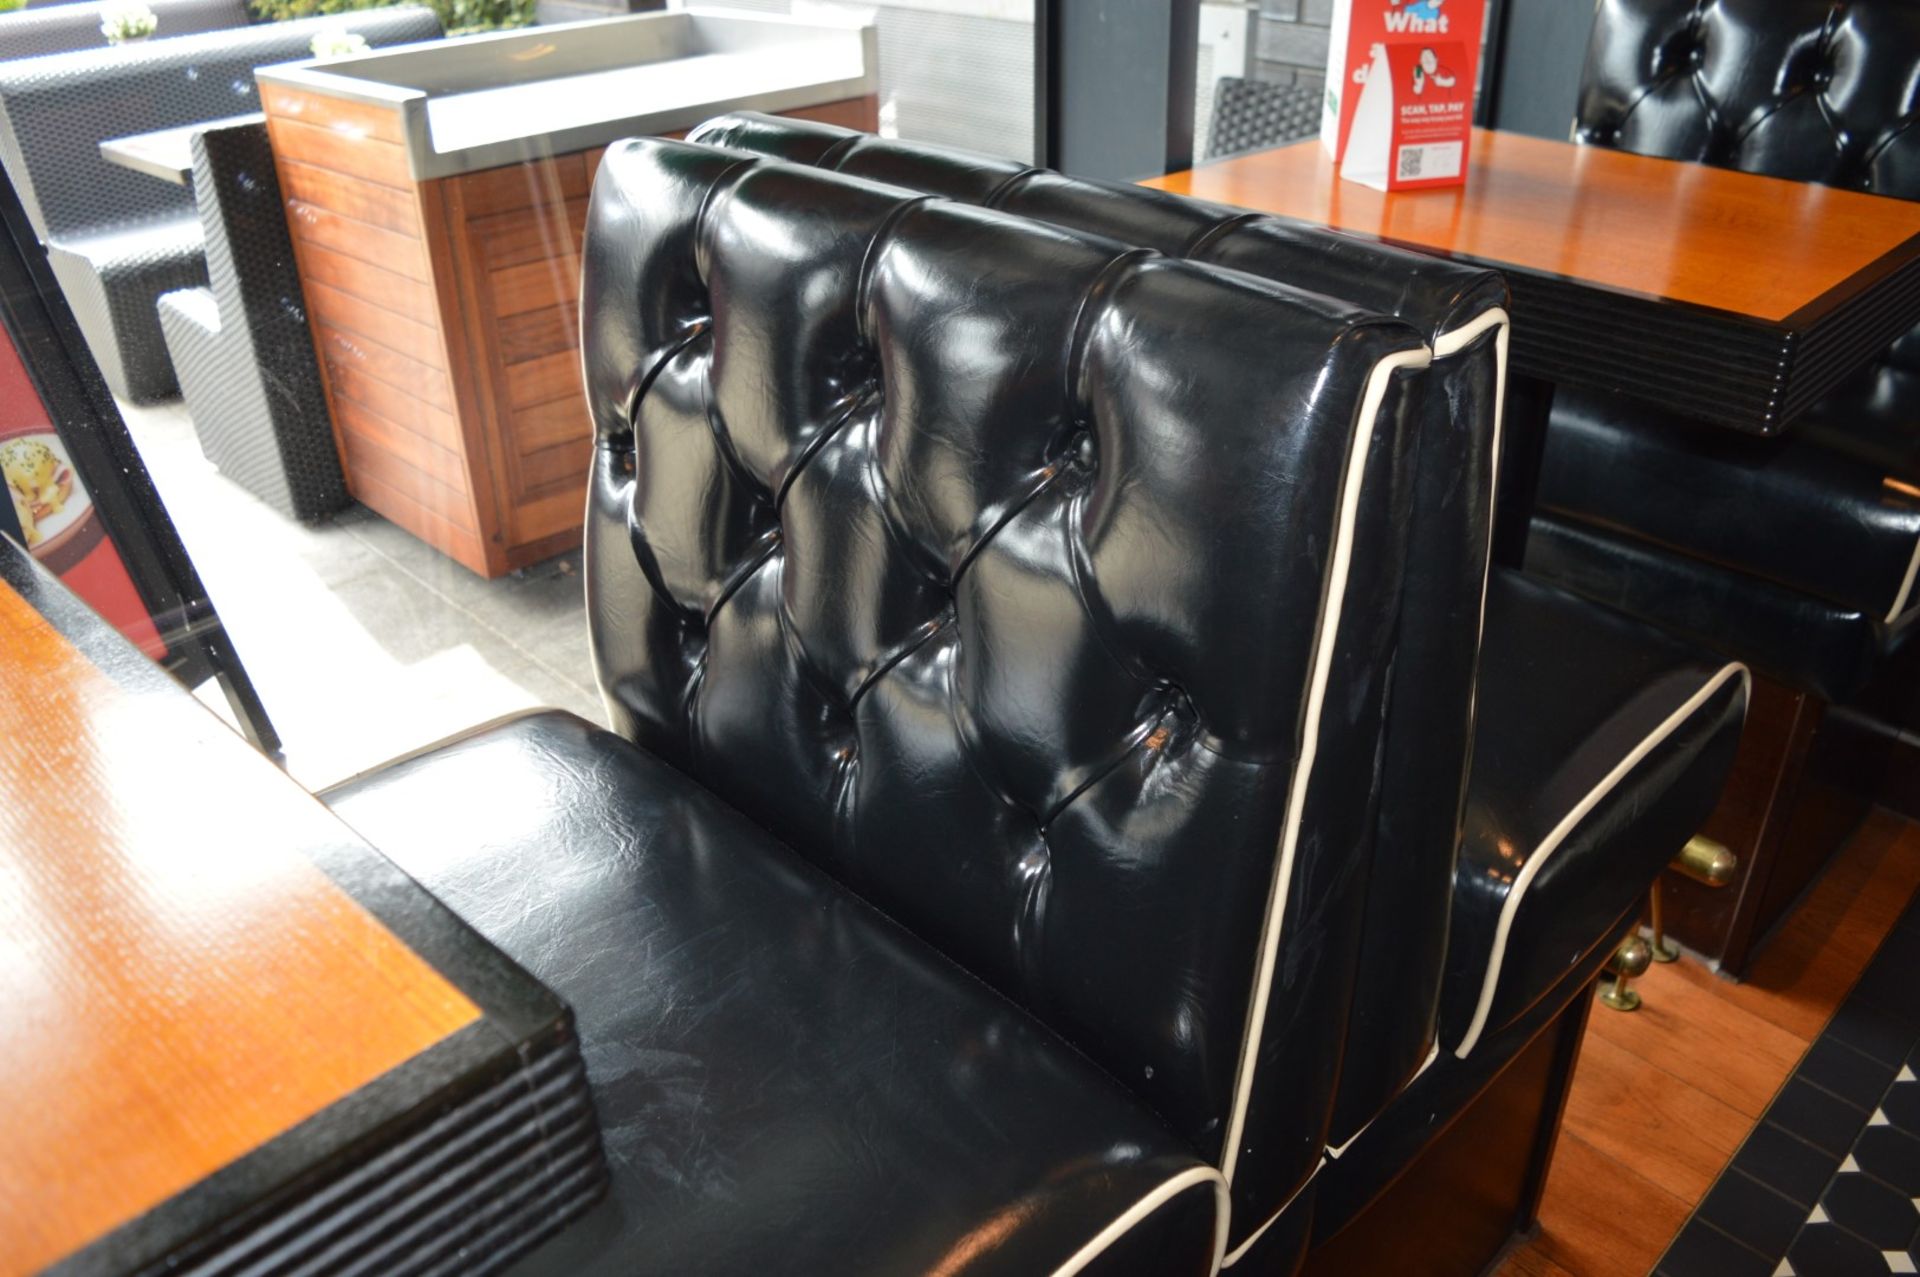 3 x Sections of Restaurant / Cafe Booth Seating With Two Poser Tables - Black Faux Leather - Image 10 of 17